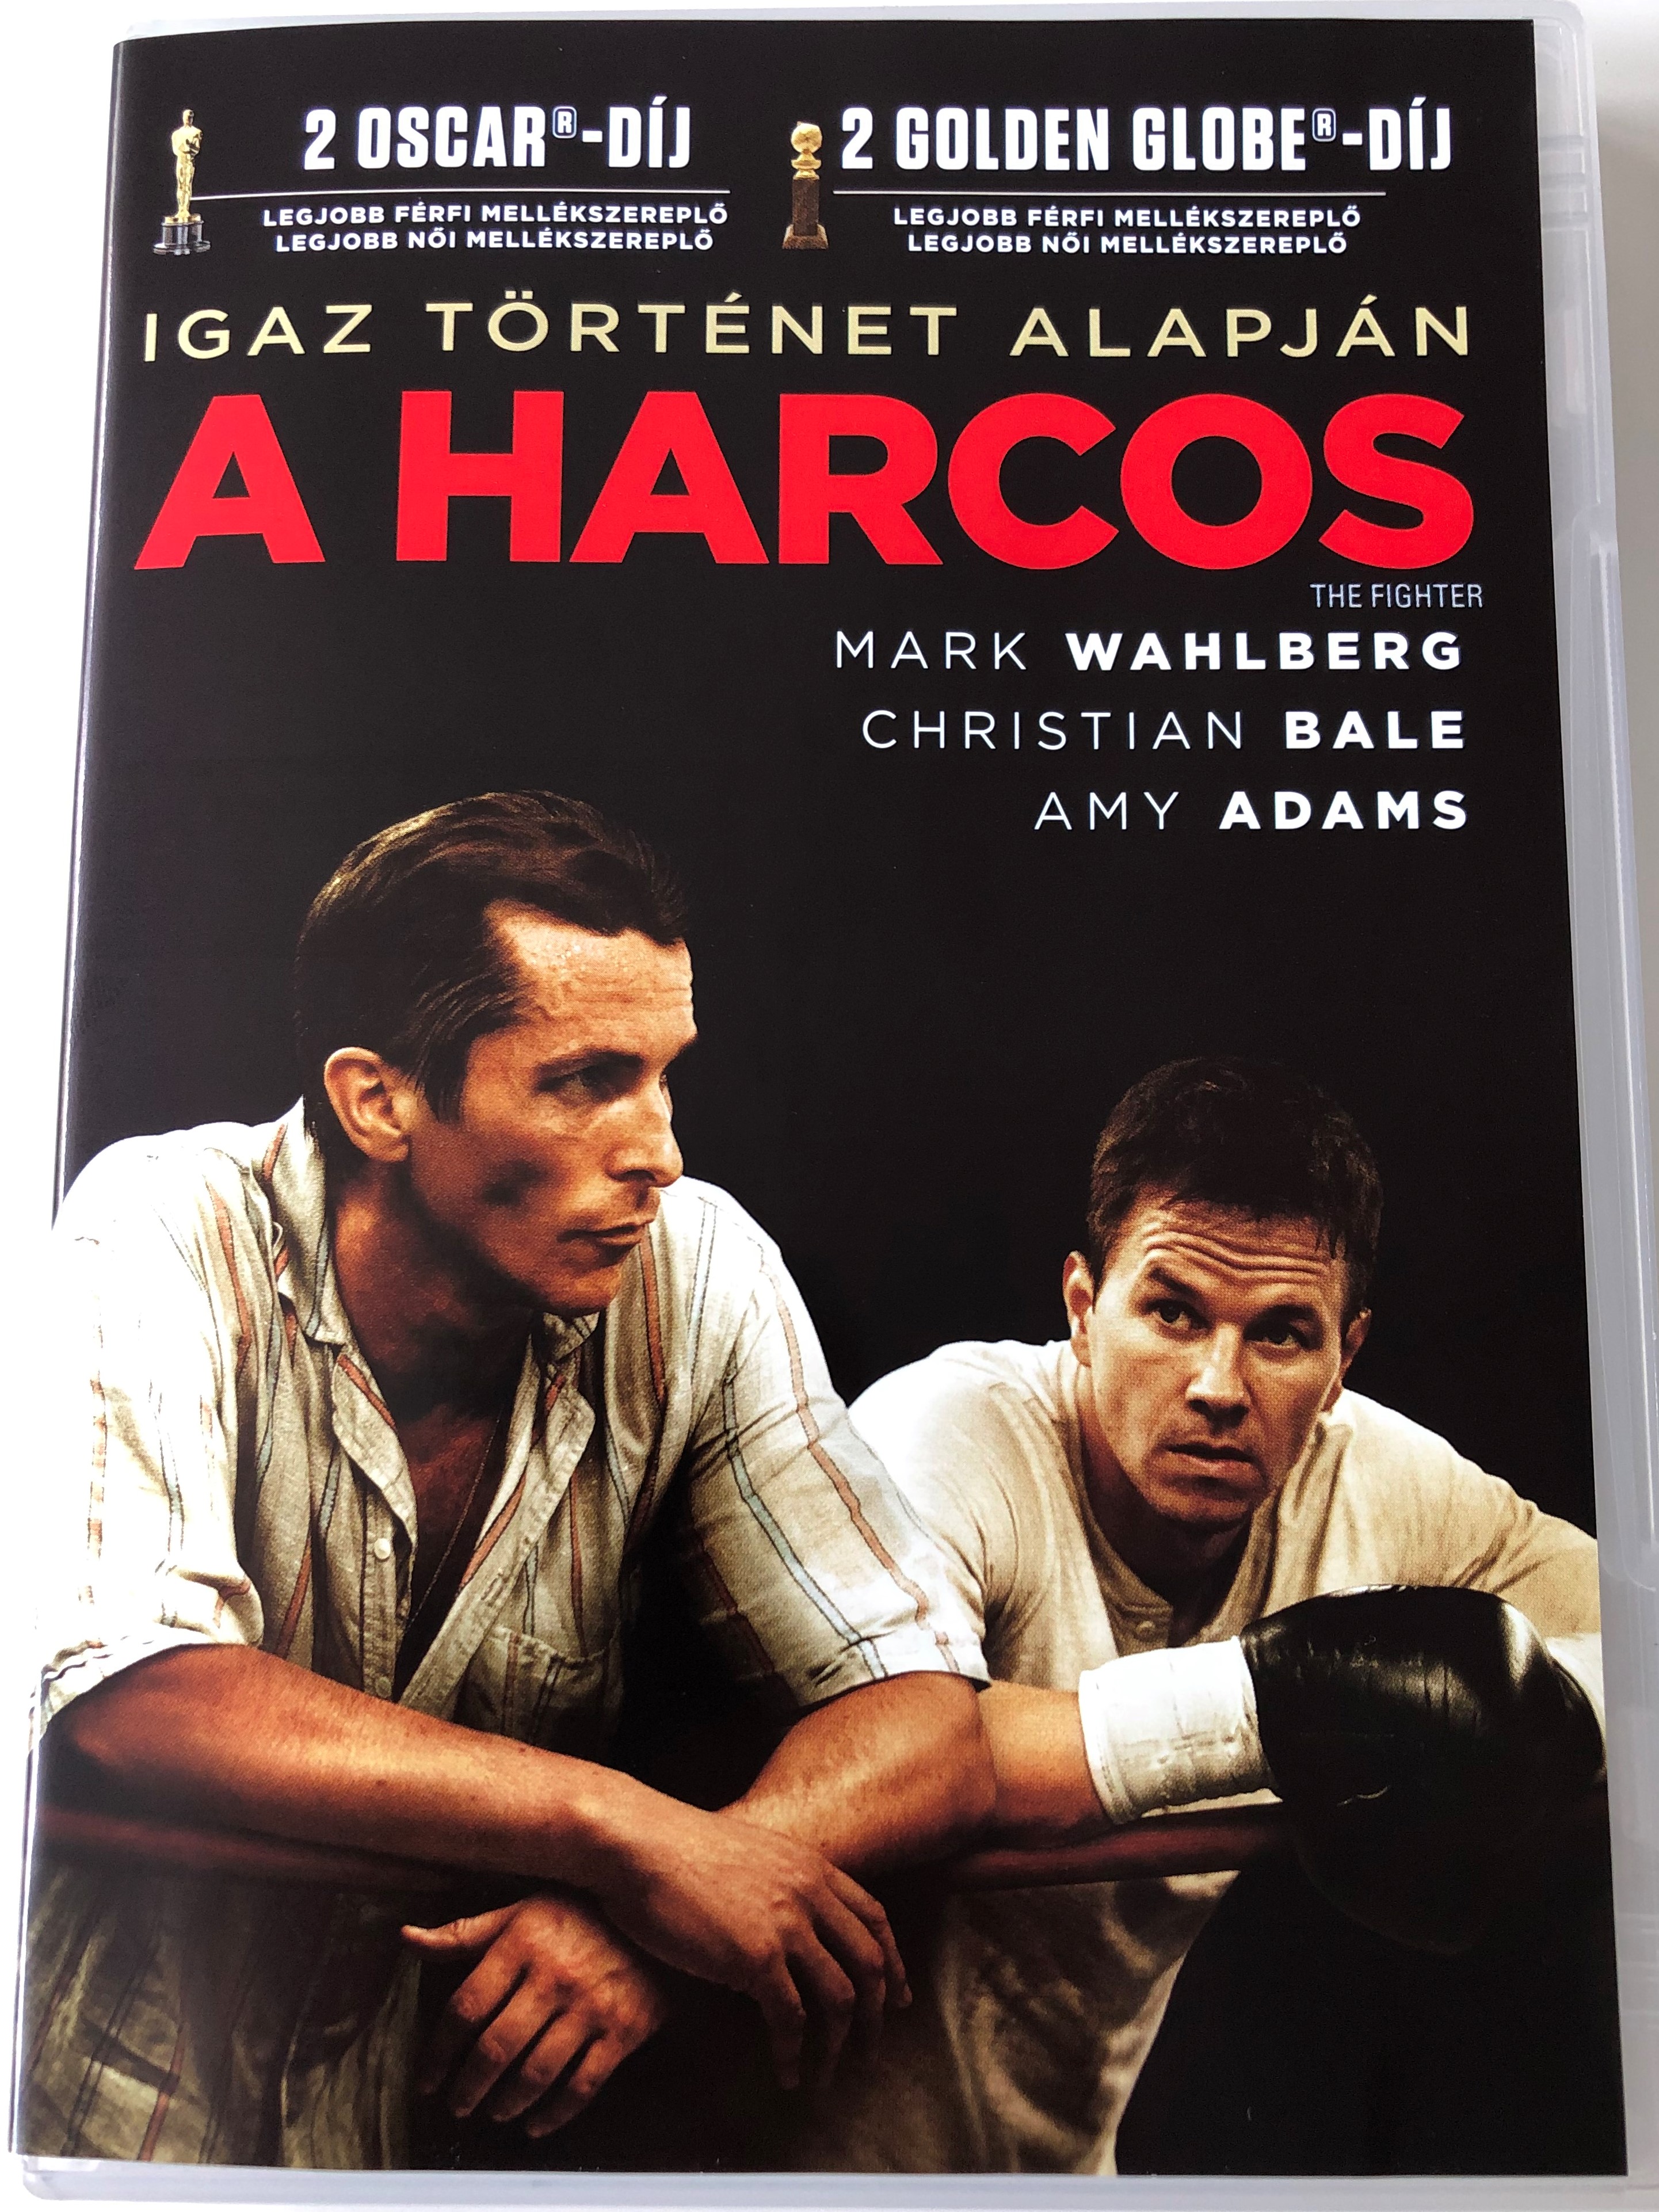 The Fighter DVD 2010 A harcos / Directed by David O. Russel / Starring:  Christian Bale, AMy Adams, Mark Wahlberg - bibleinmylanguage